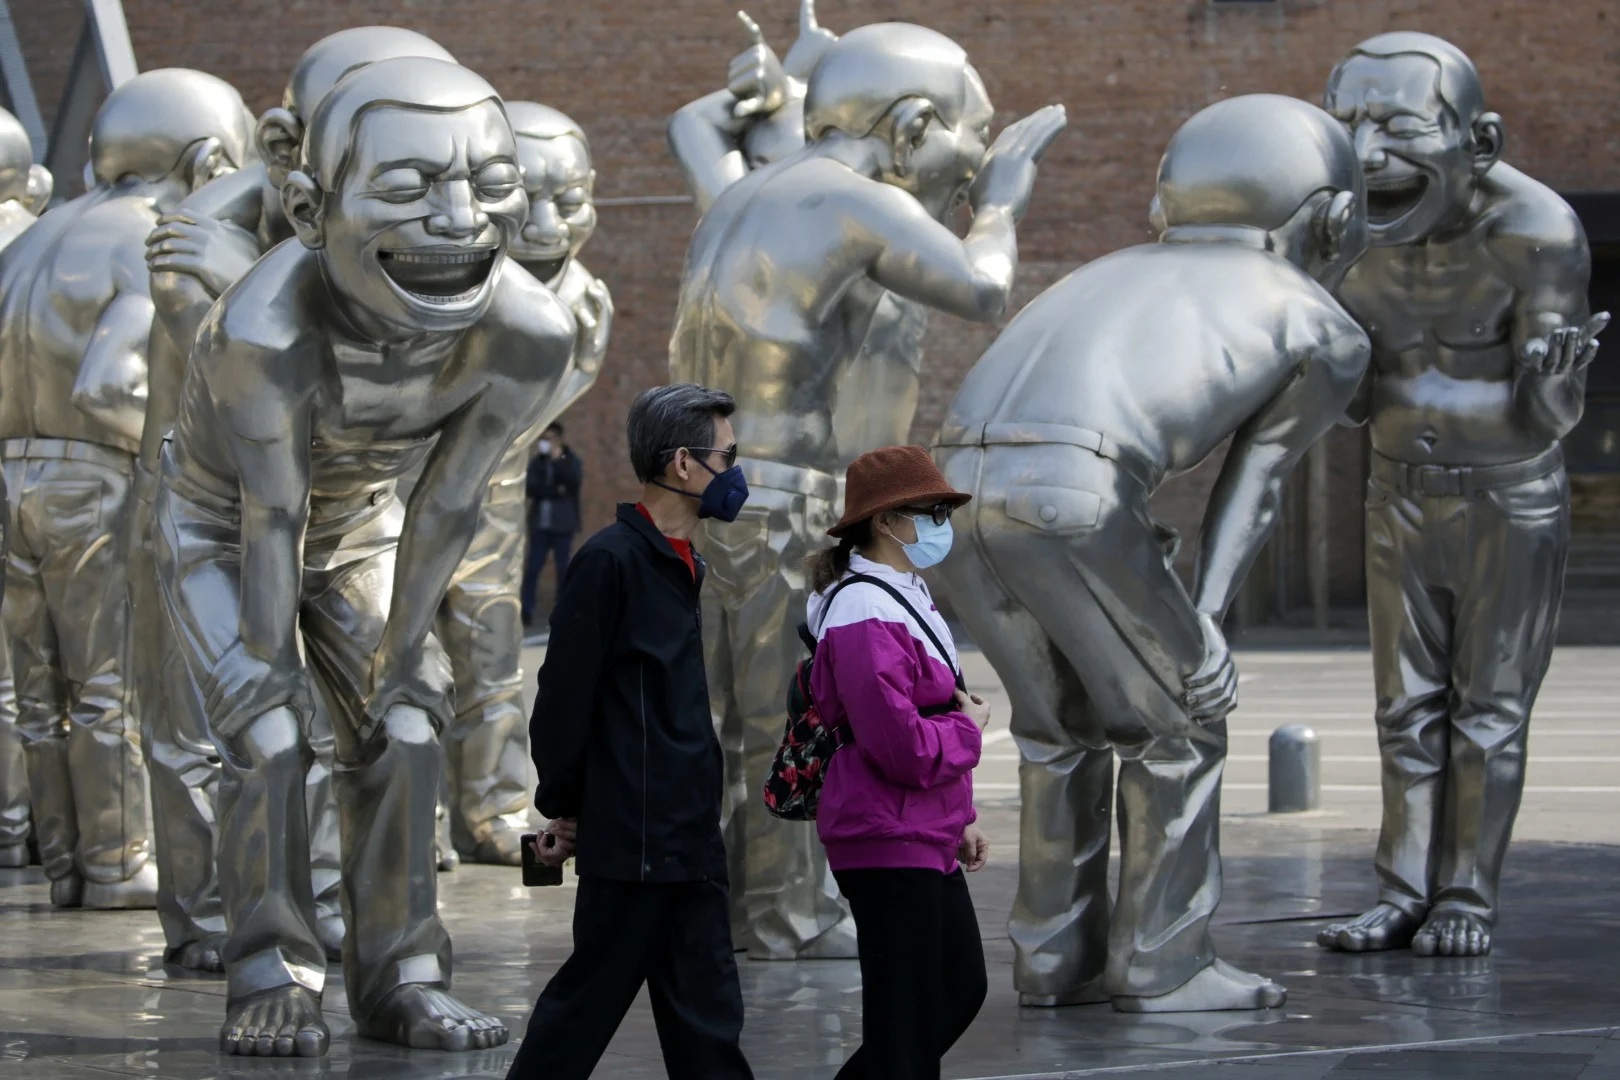 People walk by sculptures on display outside an art gallery in Beijing on April 28 2020